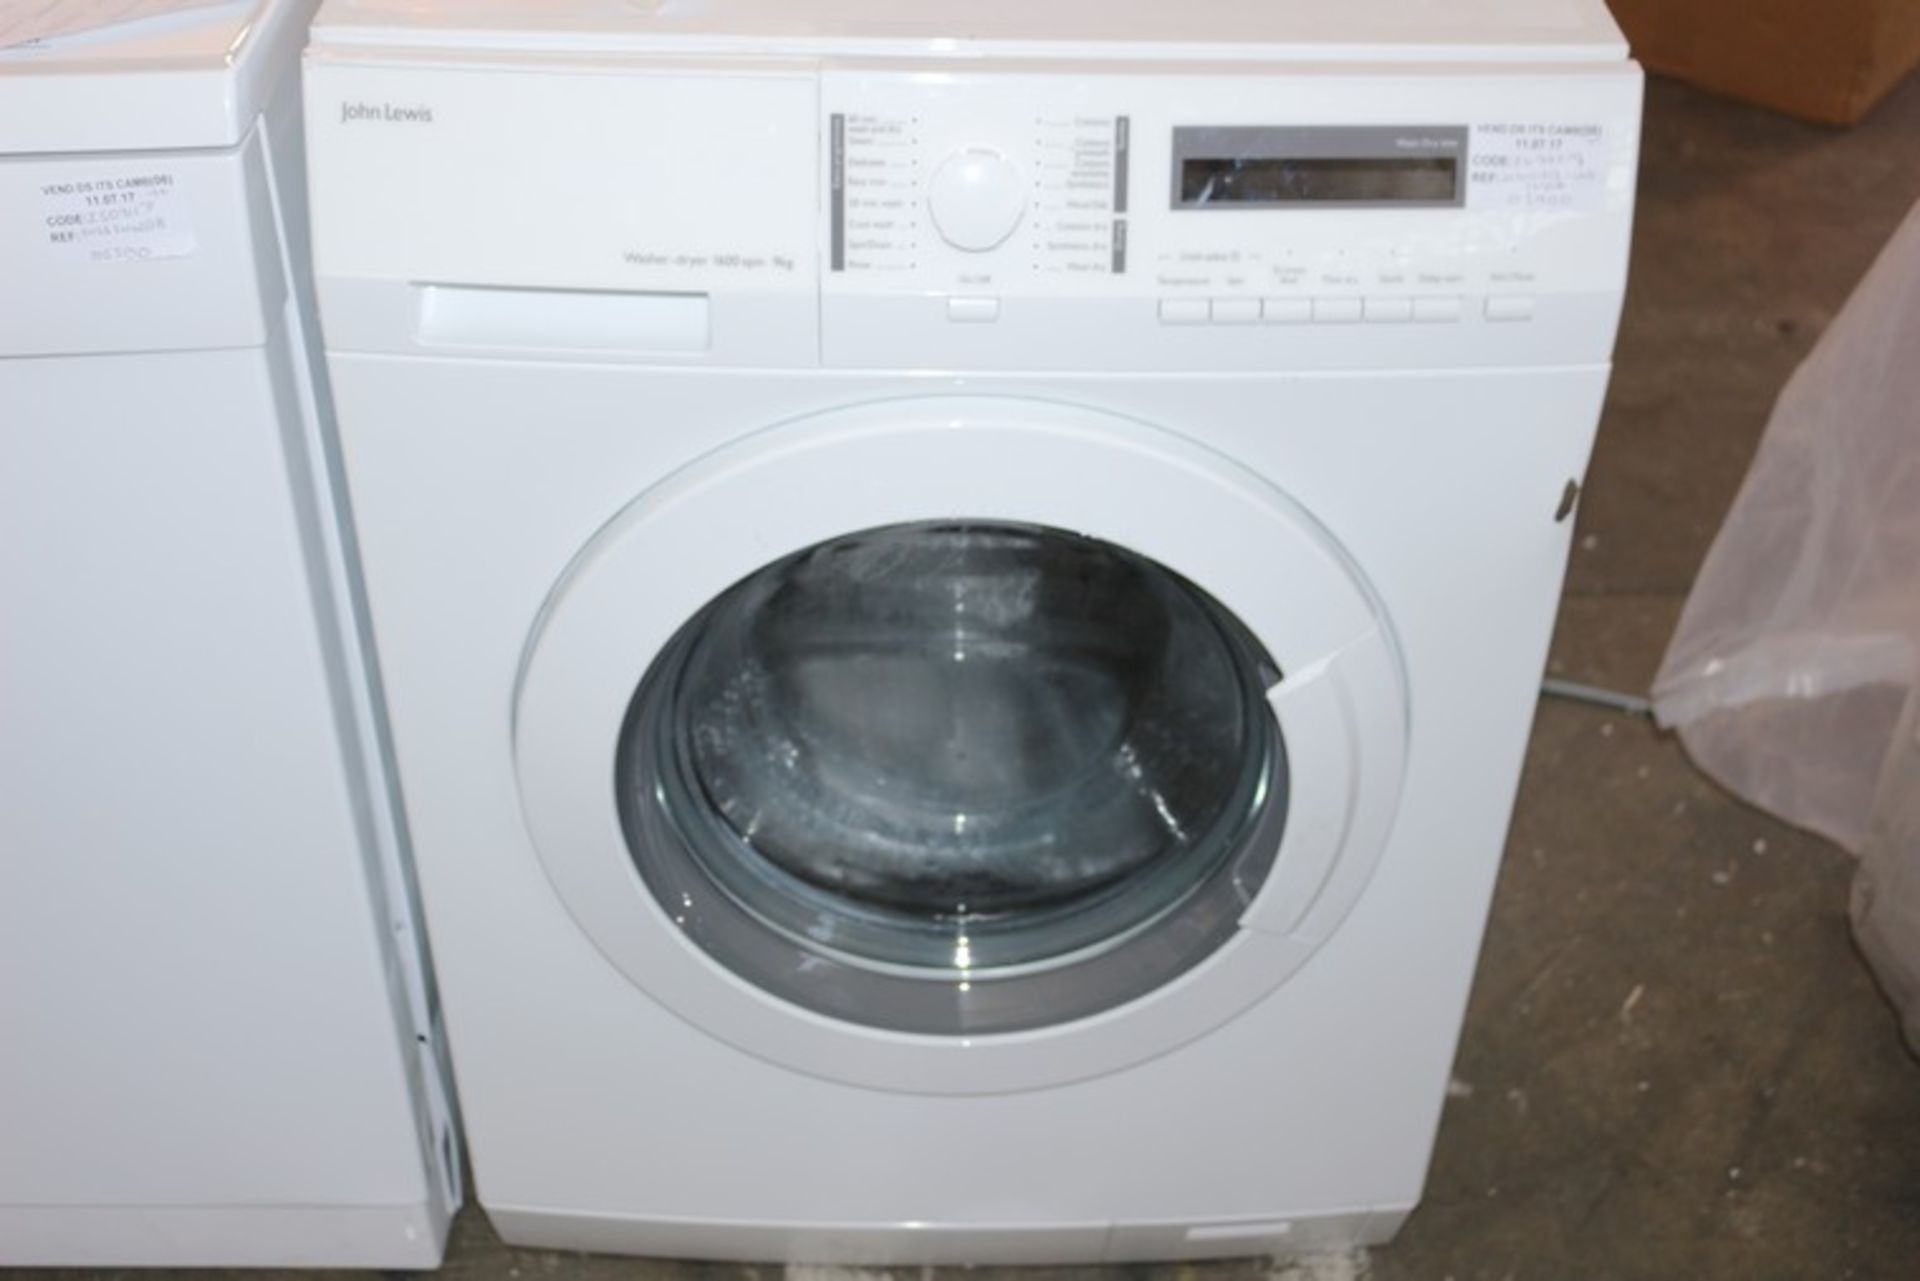 1 x JLWD1613 WASHER DRYER IN WHITE RRP £600 (IN NEED OF ATTENTION)(11.7.17)(2499279) *PLEASE NOTE